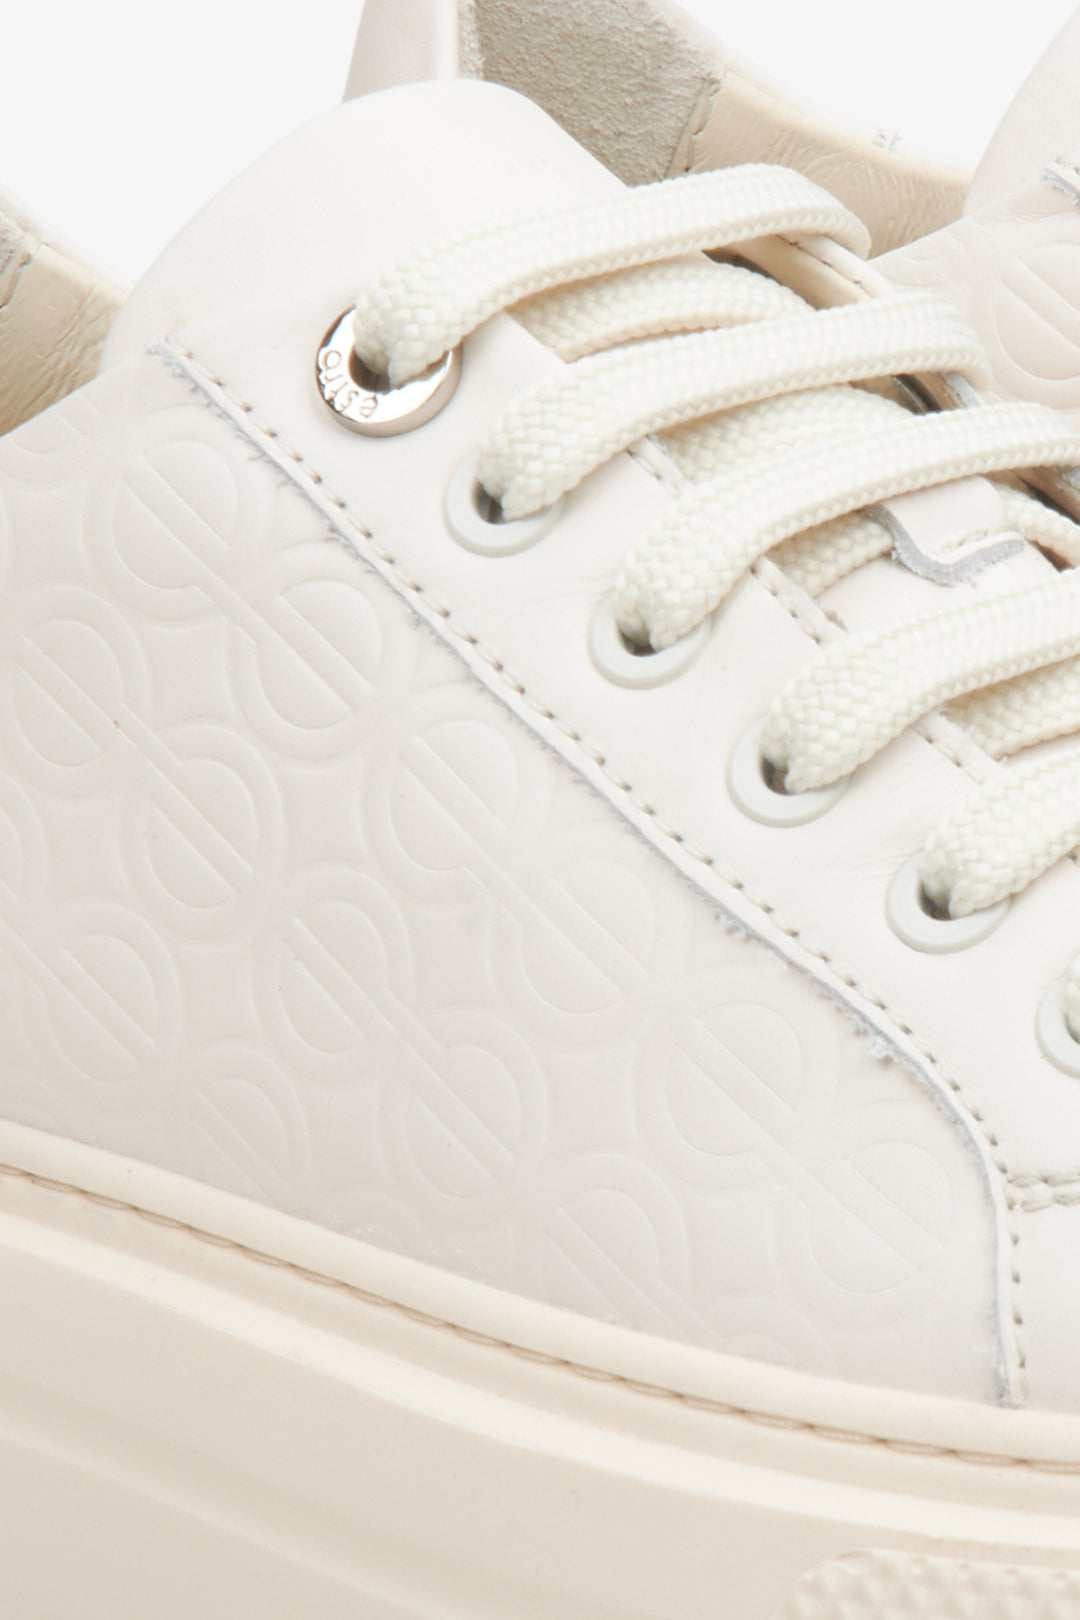 Estro women's light beige sneakers made of genuine leather - close-up on the details.